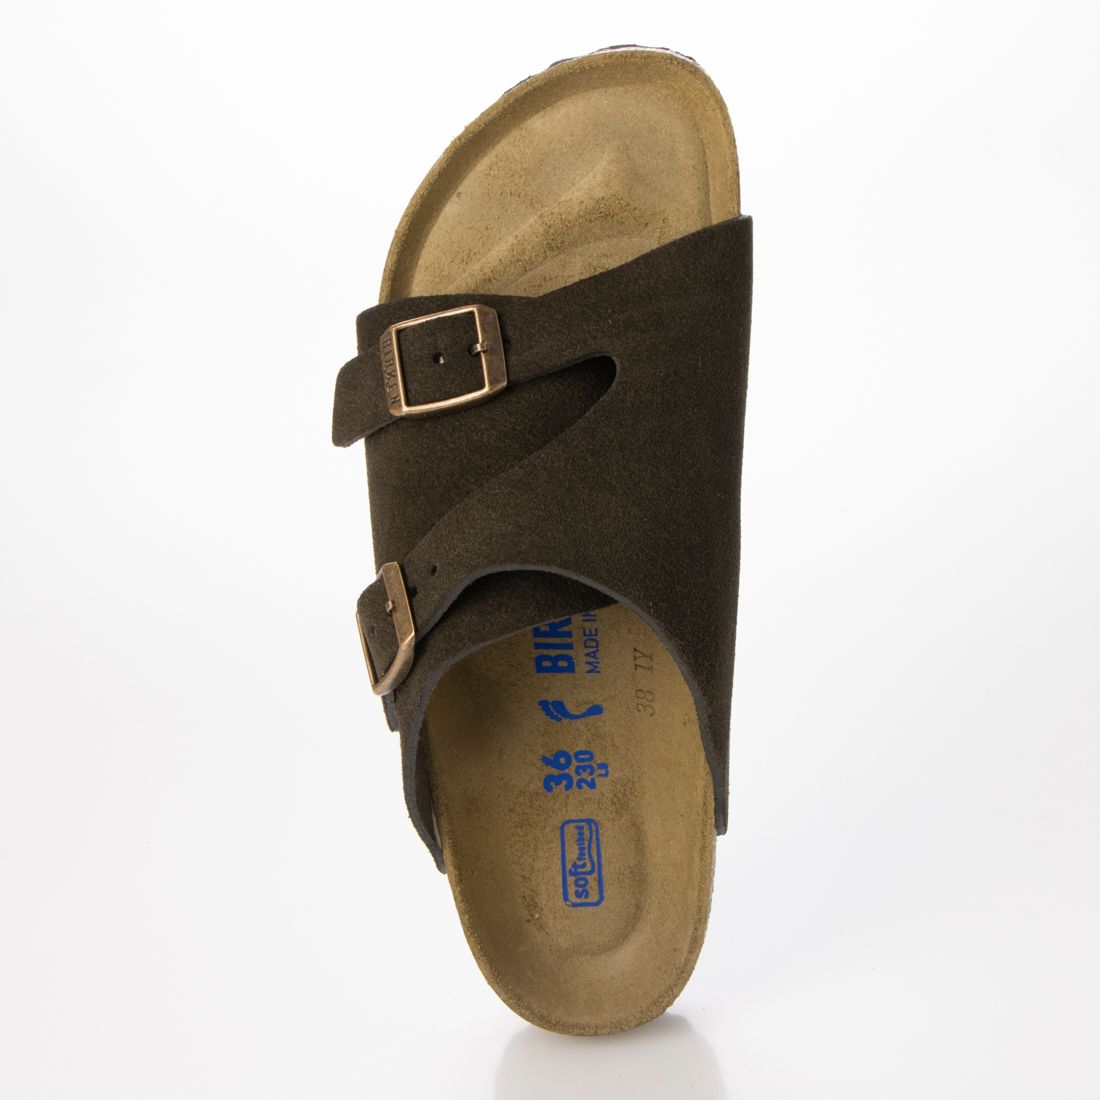 BIRKENSTOCK - Japanese brand clothing shopping website｜Enrich your daily  wear｜FASBEE